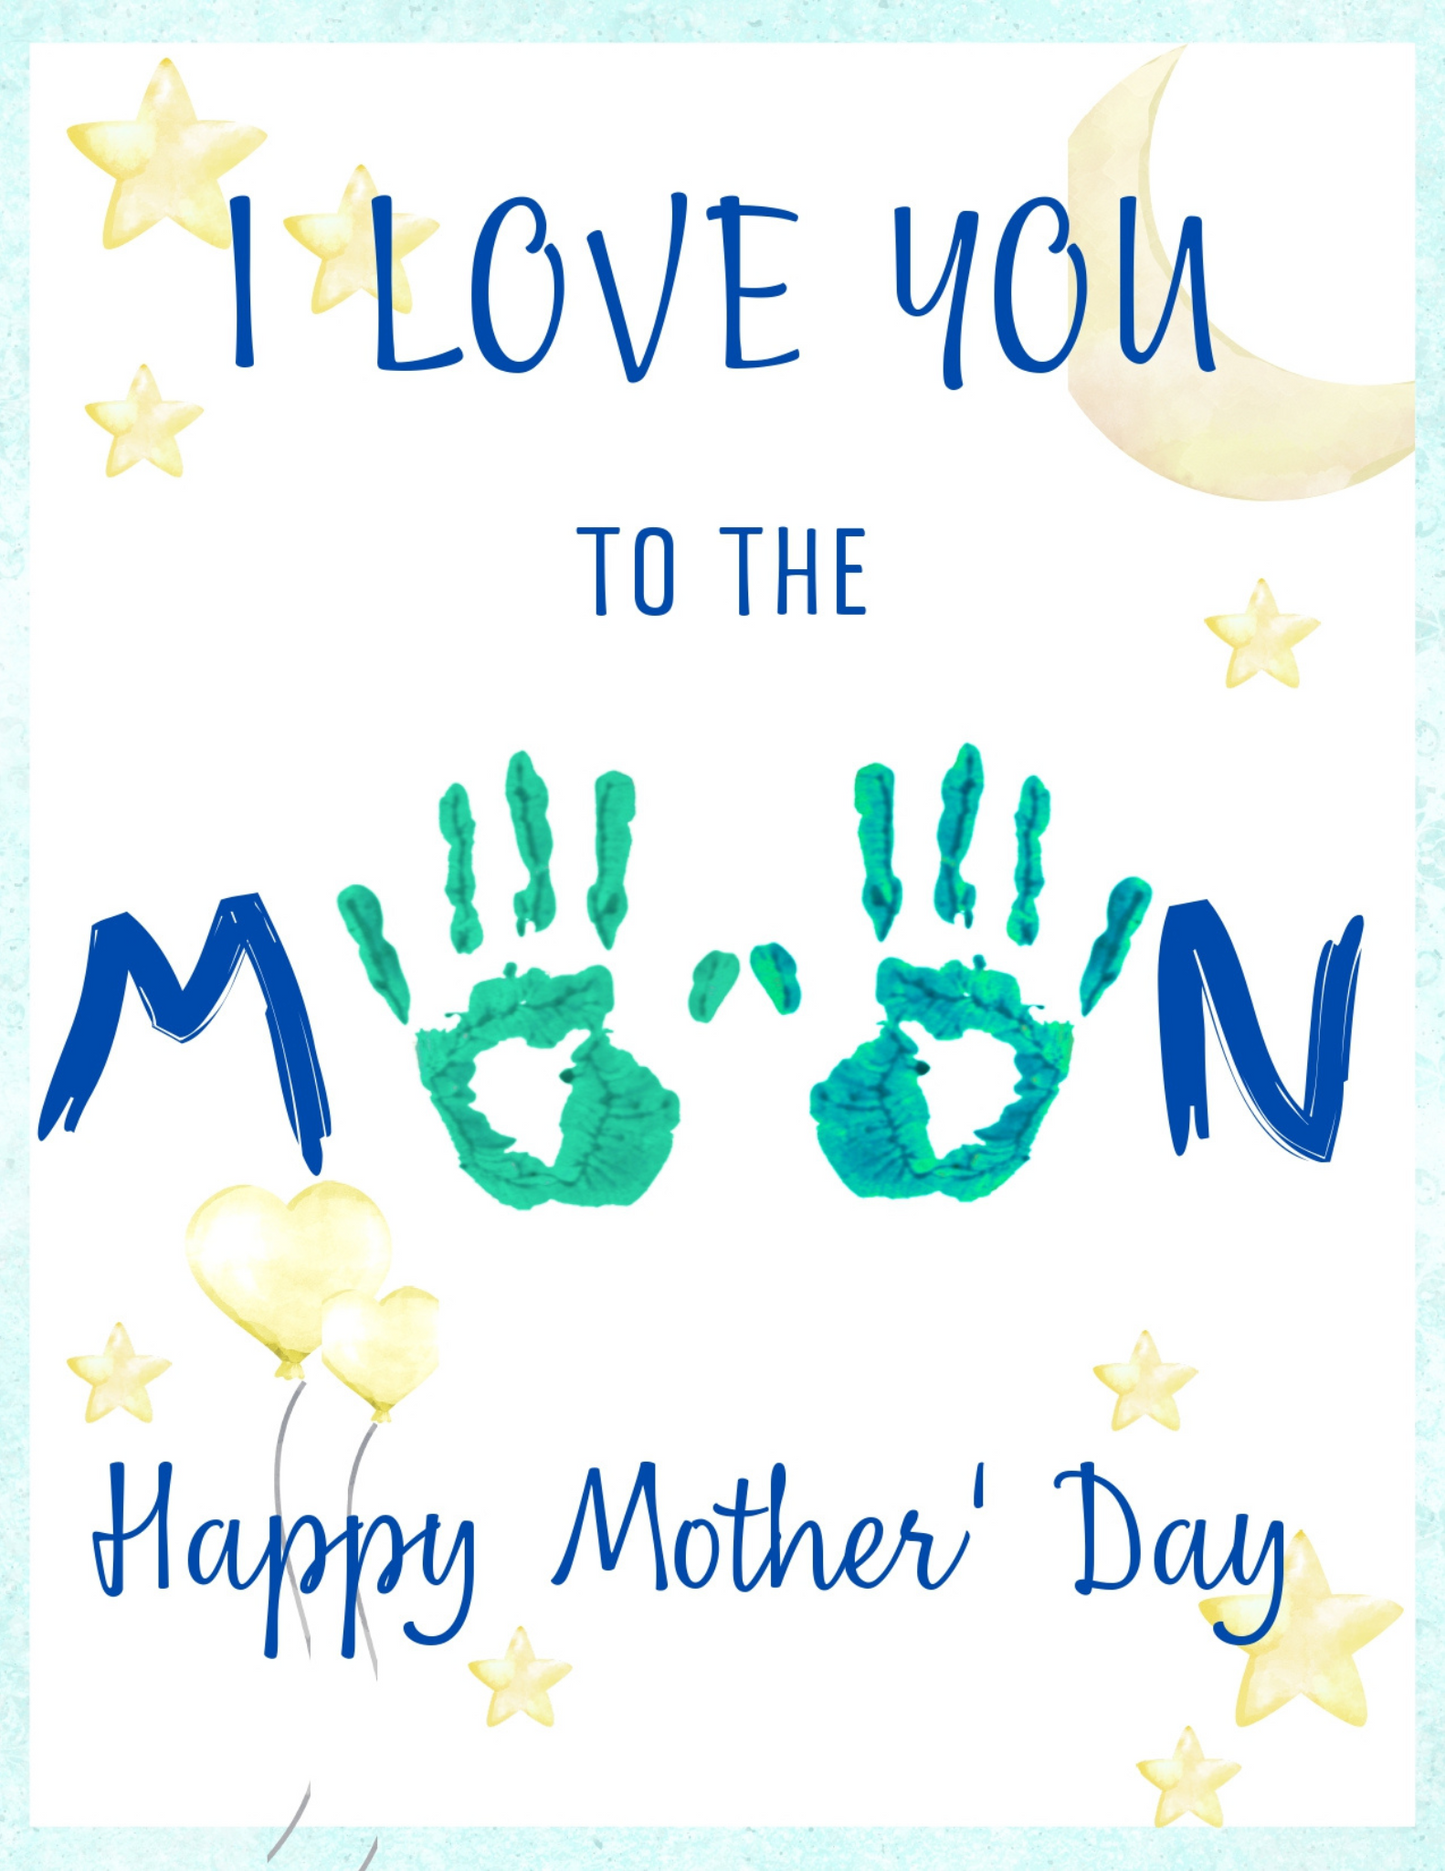 I love you to the moon handprint art for moms on mother's day